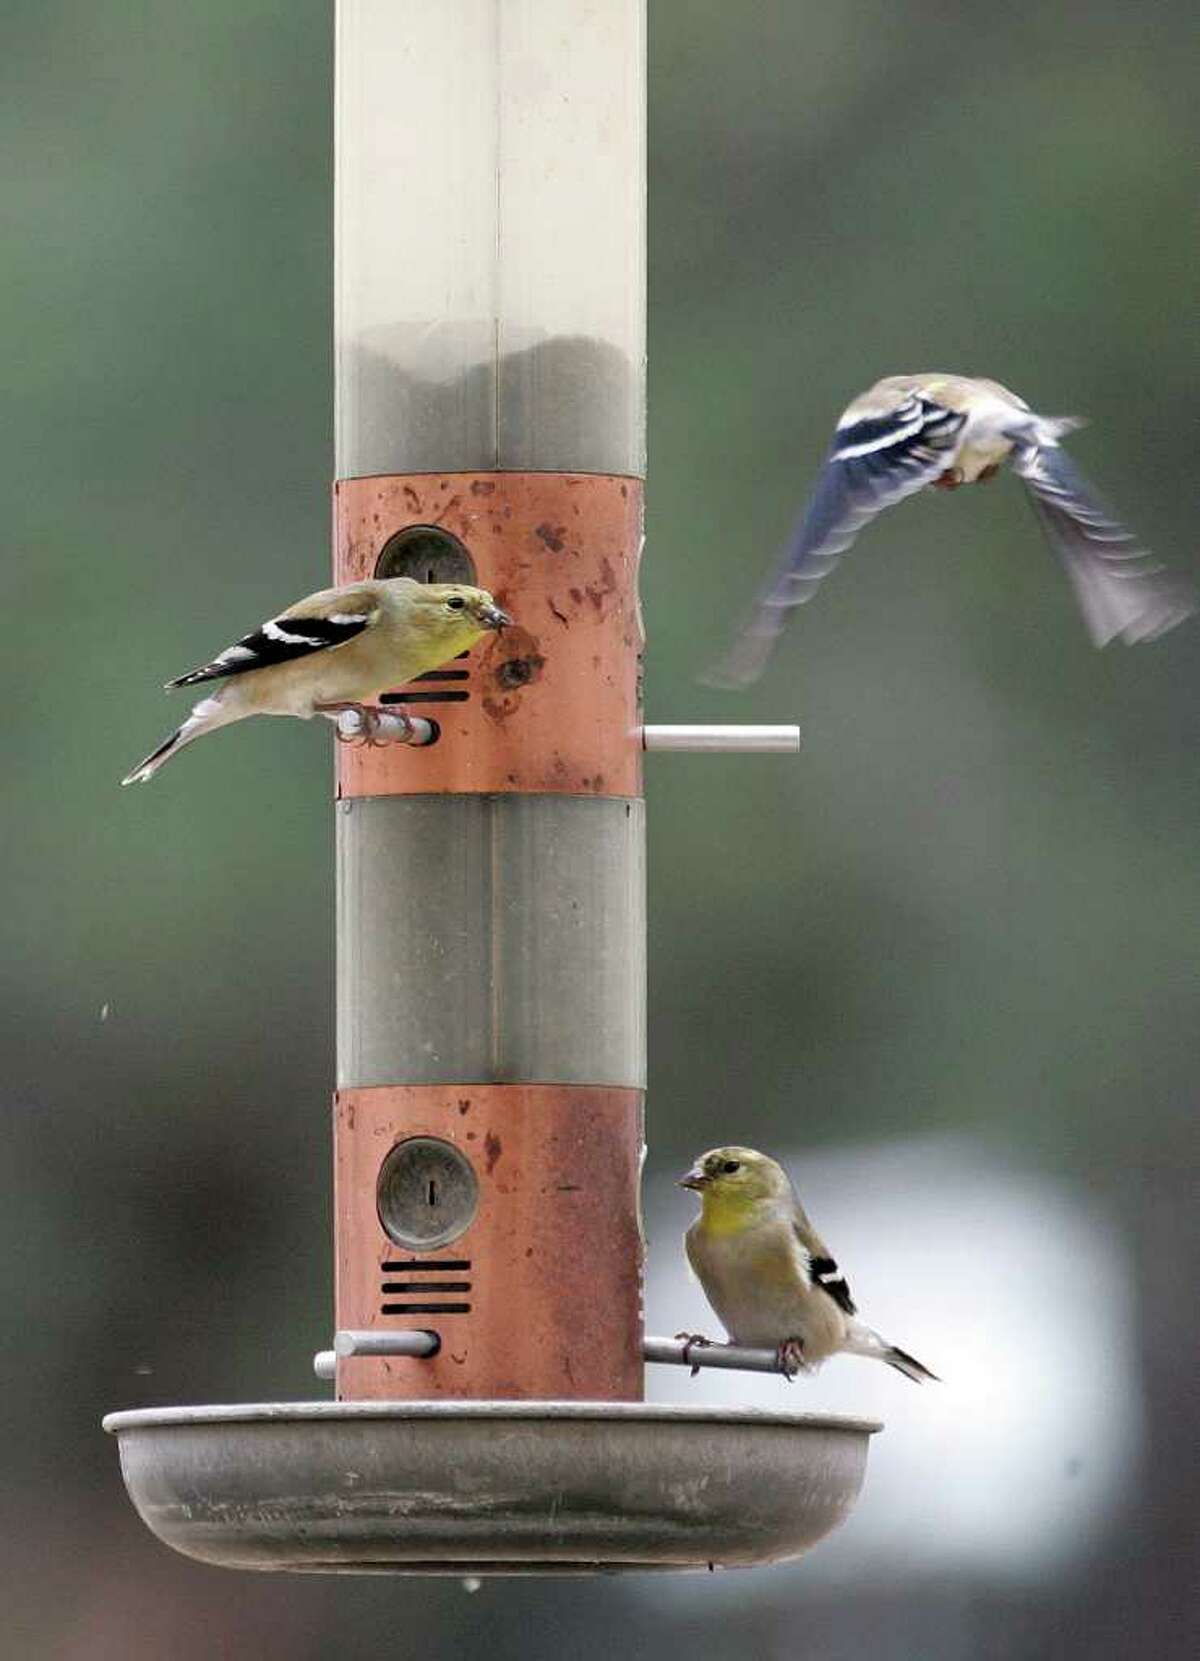  Don't forget to feed birds this winter.